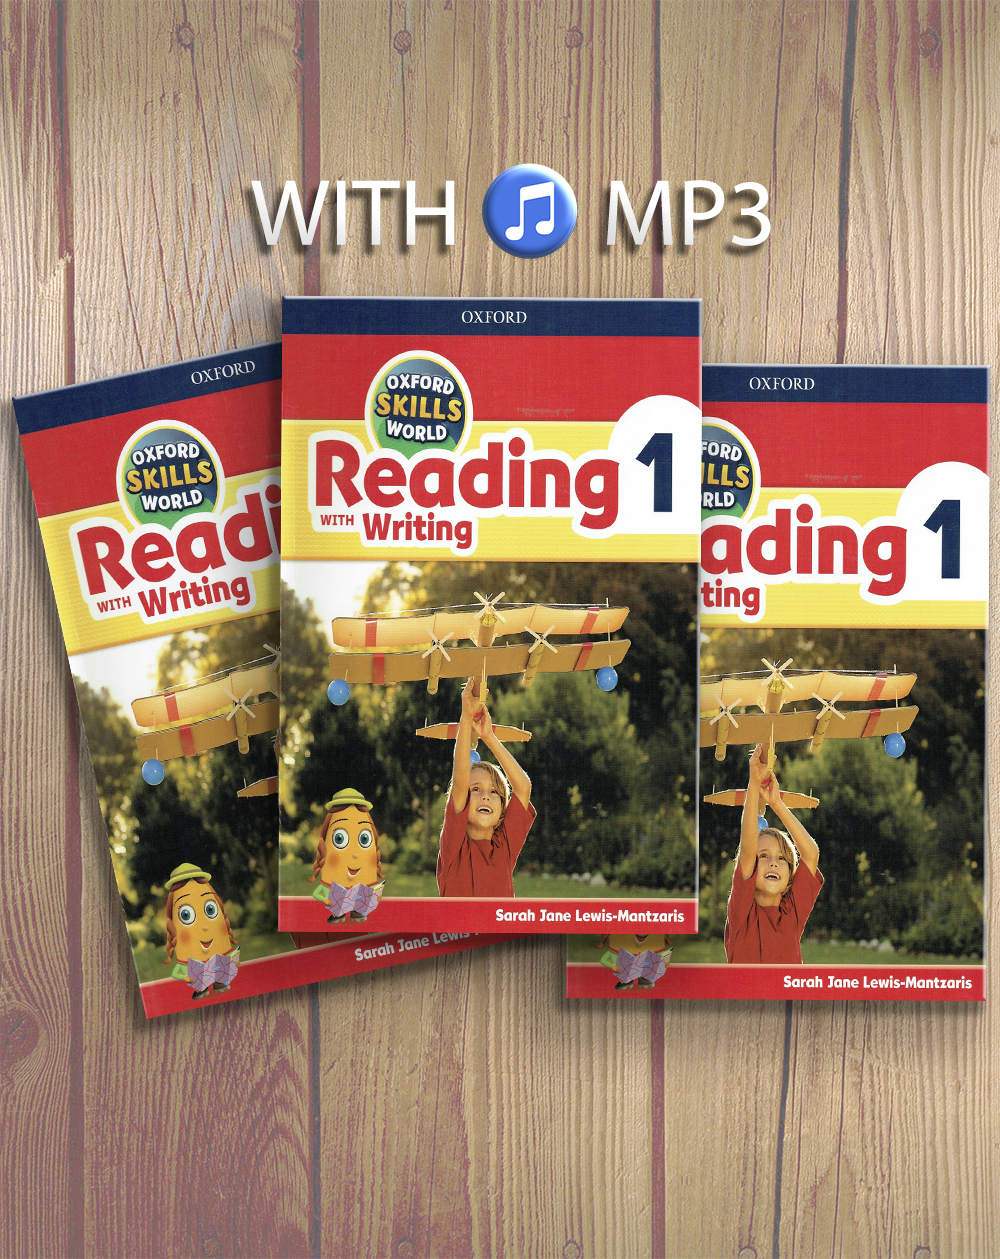 Oxford Skill World Reading with Writing in màu đẹp tặng file nghe MP3